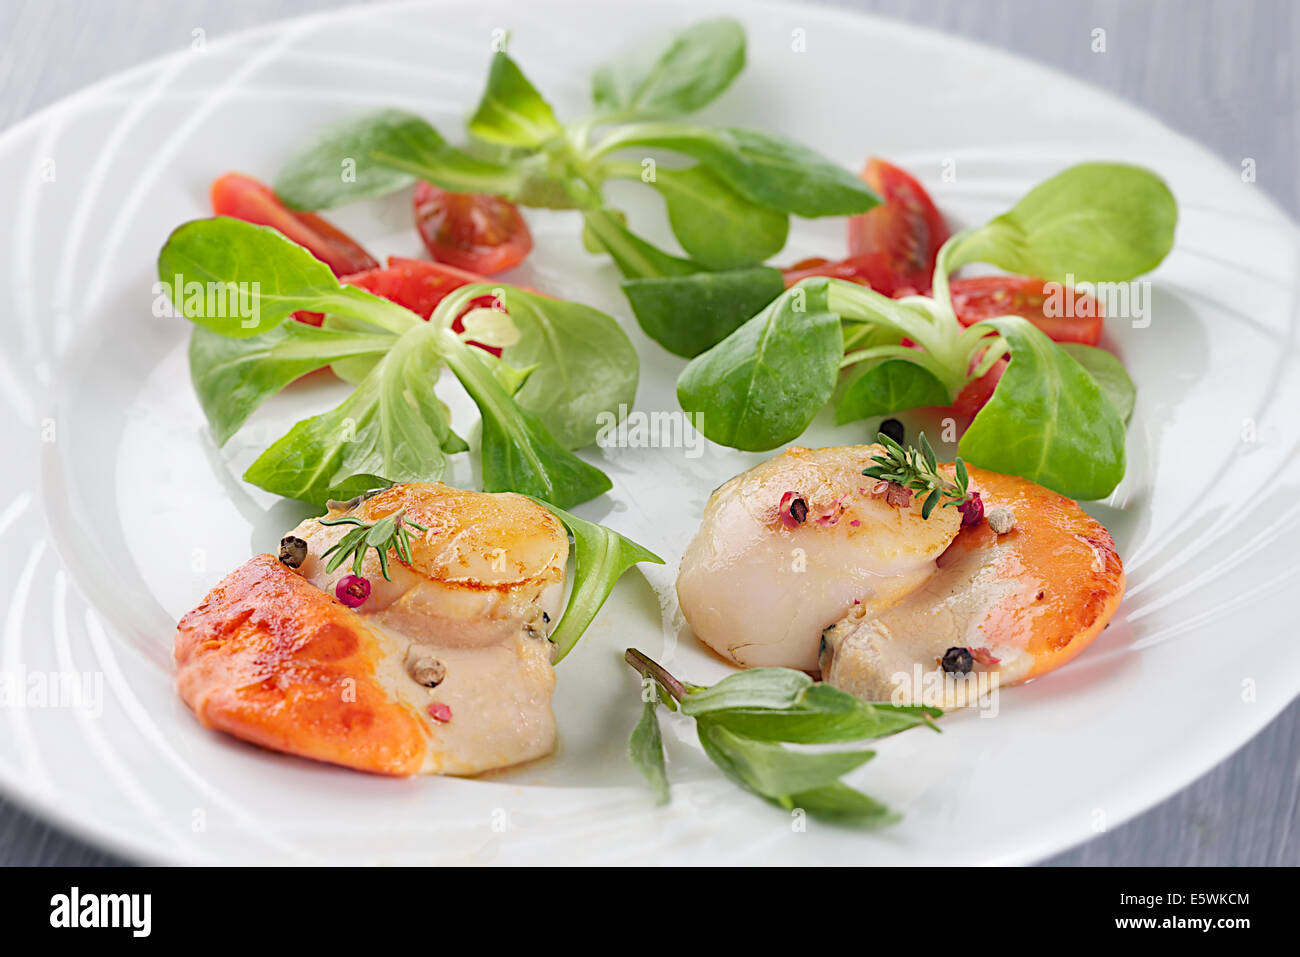 Great scallop Stock Photo